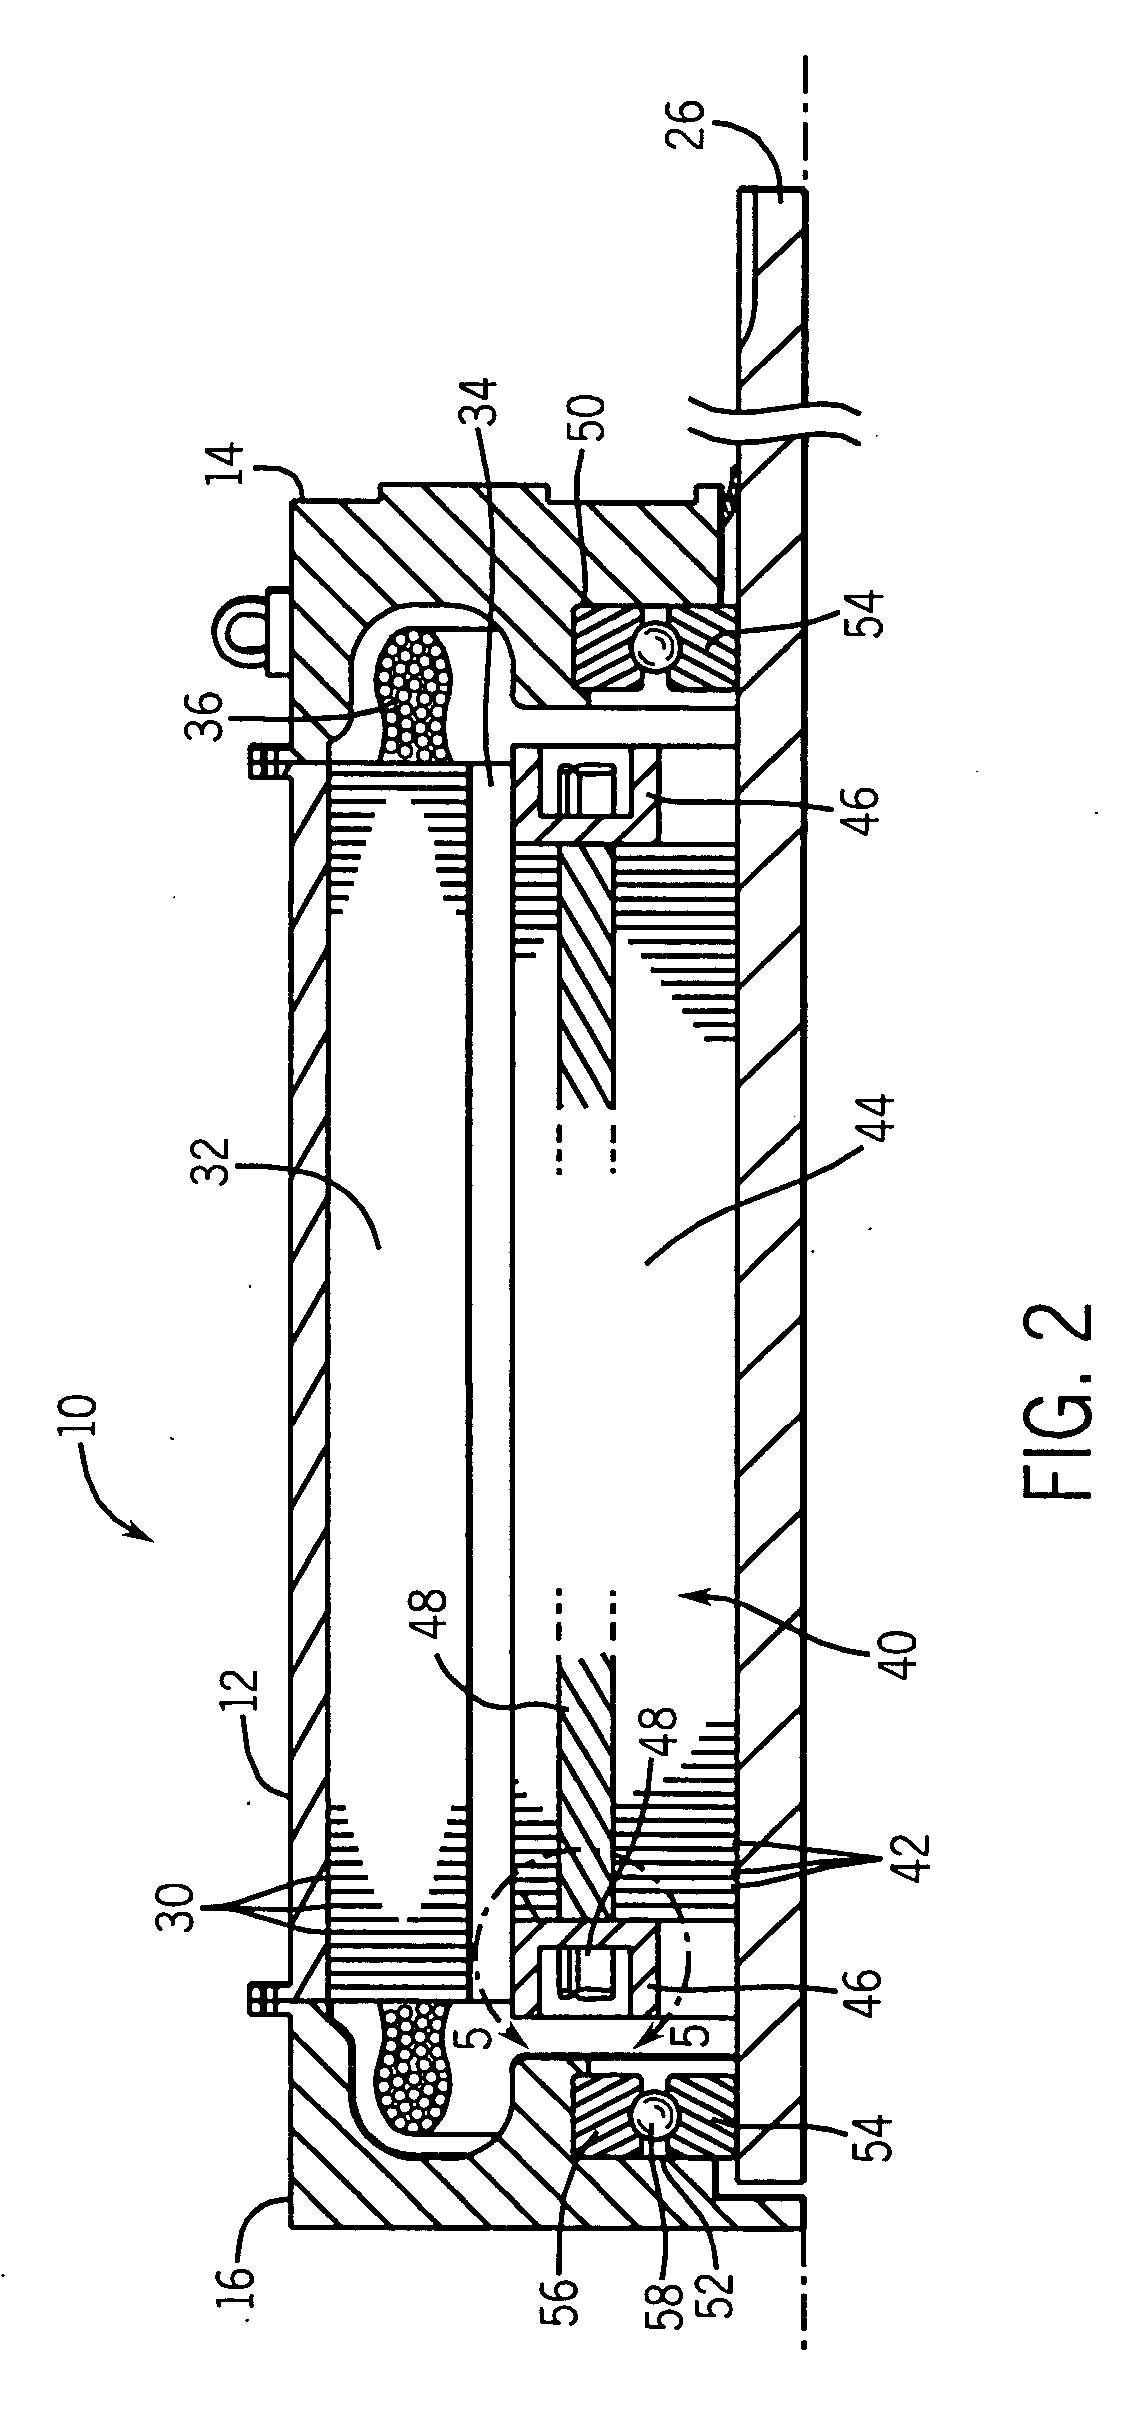 Rotor for an induction device